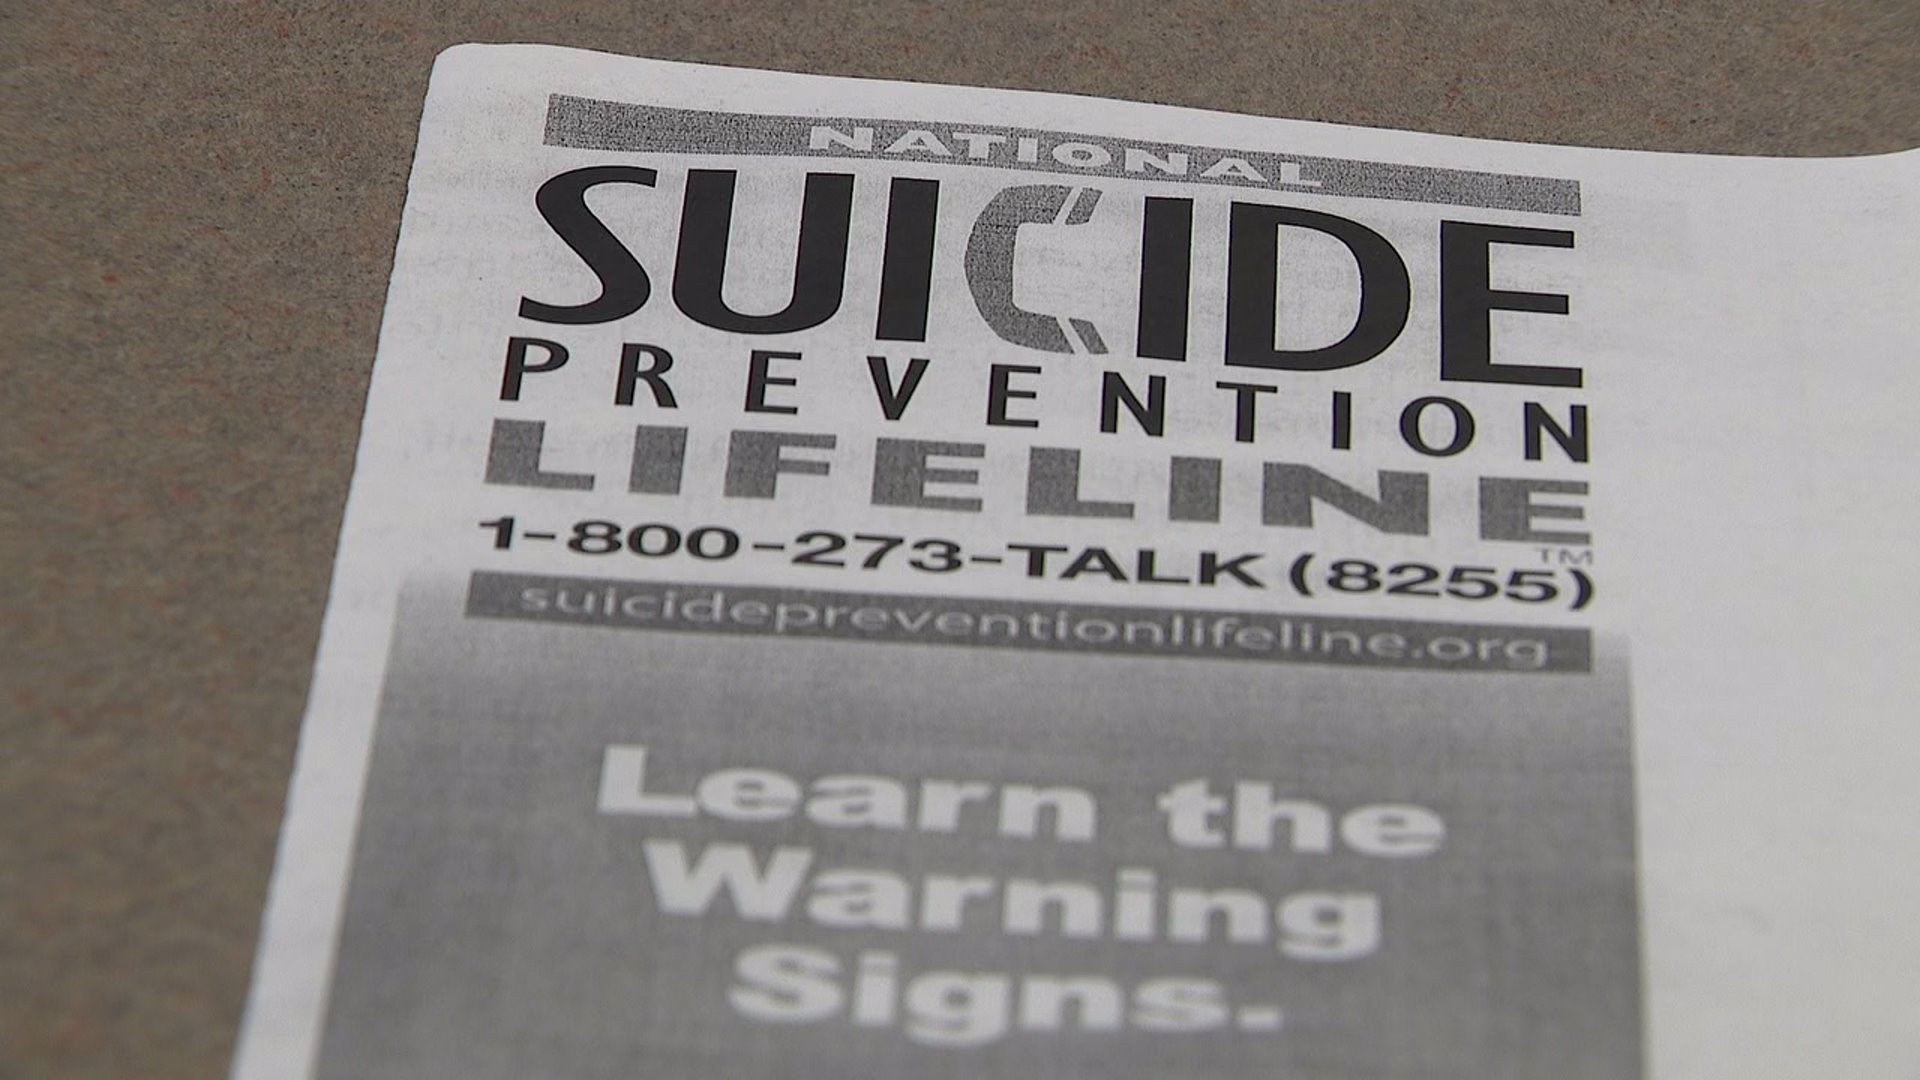 Local mental health professionals on suicide prevention